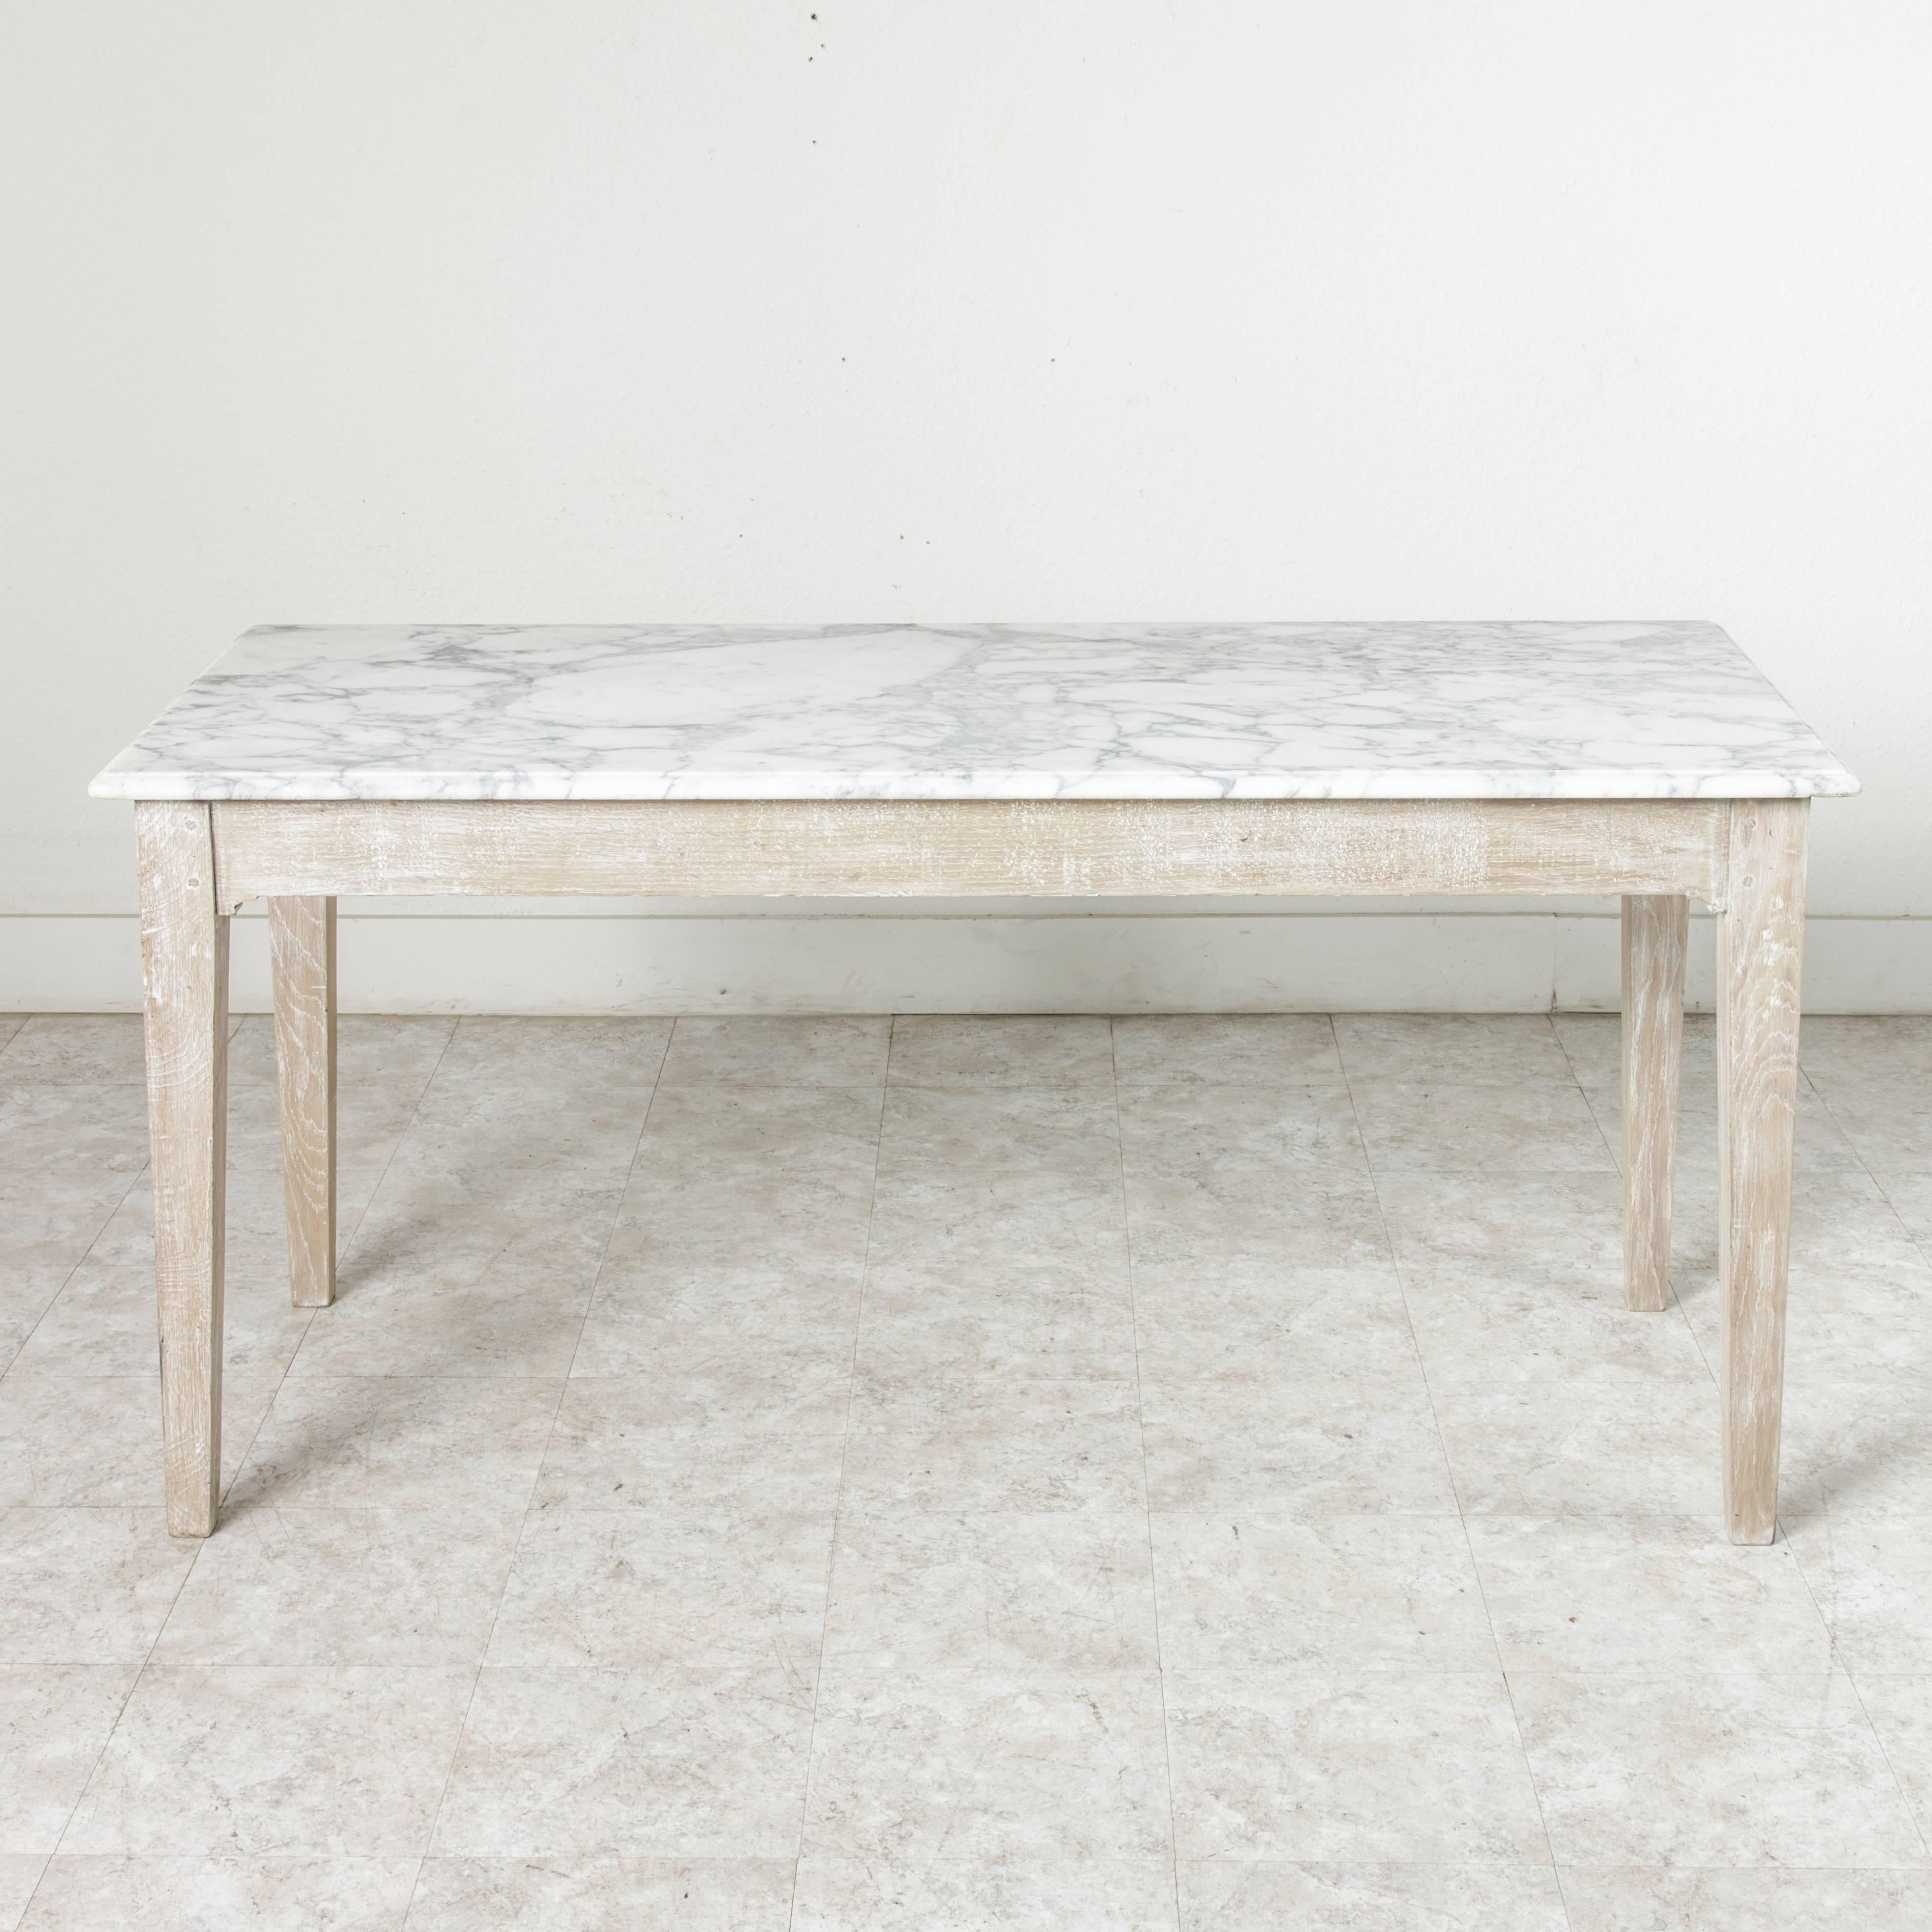 This 19th century French oak pastry table features a beautiful solid Carrara marble top, the surface of which was originally used to roll out dough. The hand pegged oak base with tapered square legs has been cerused, giving it a friendly washed